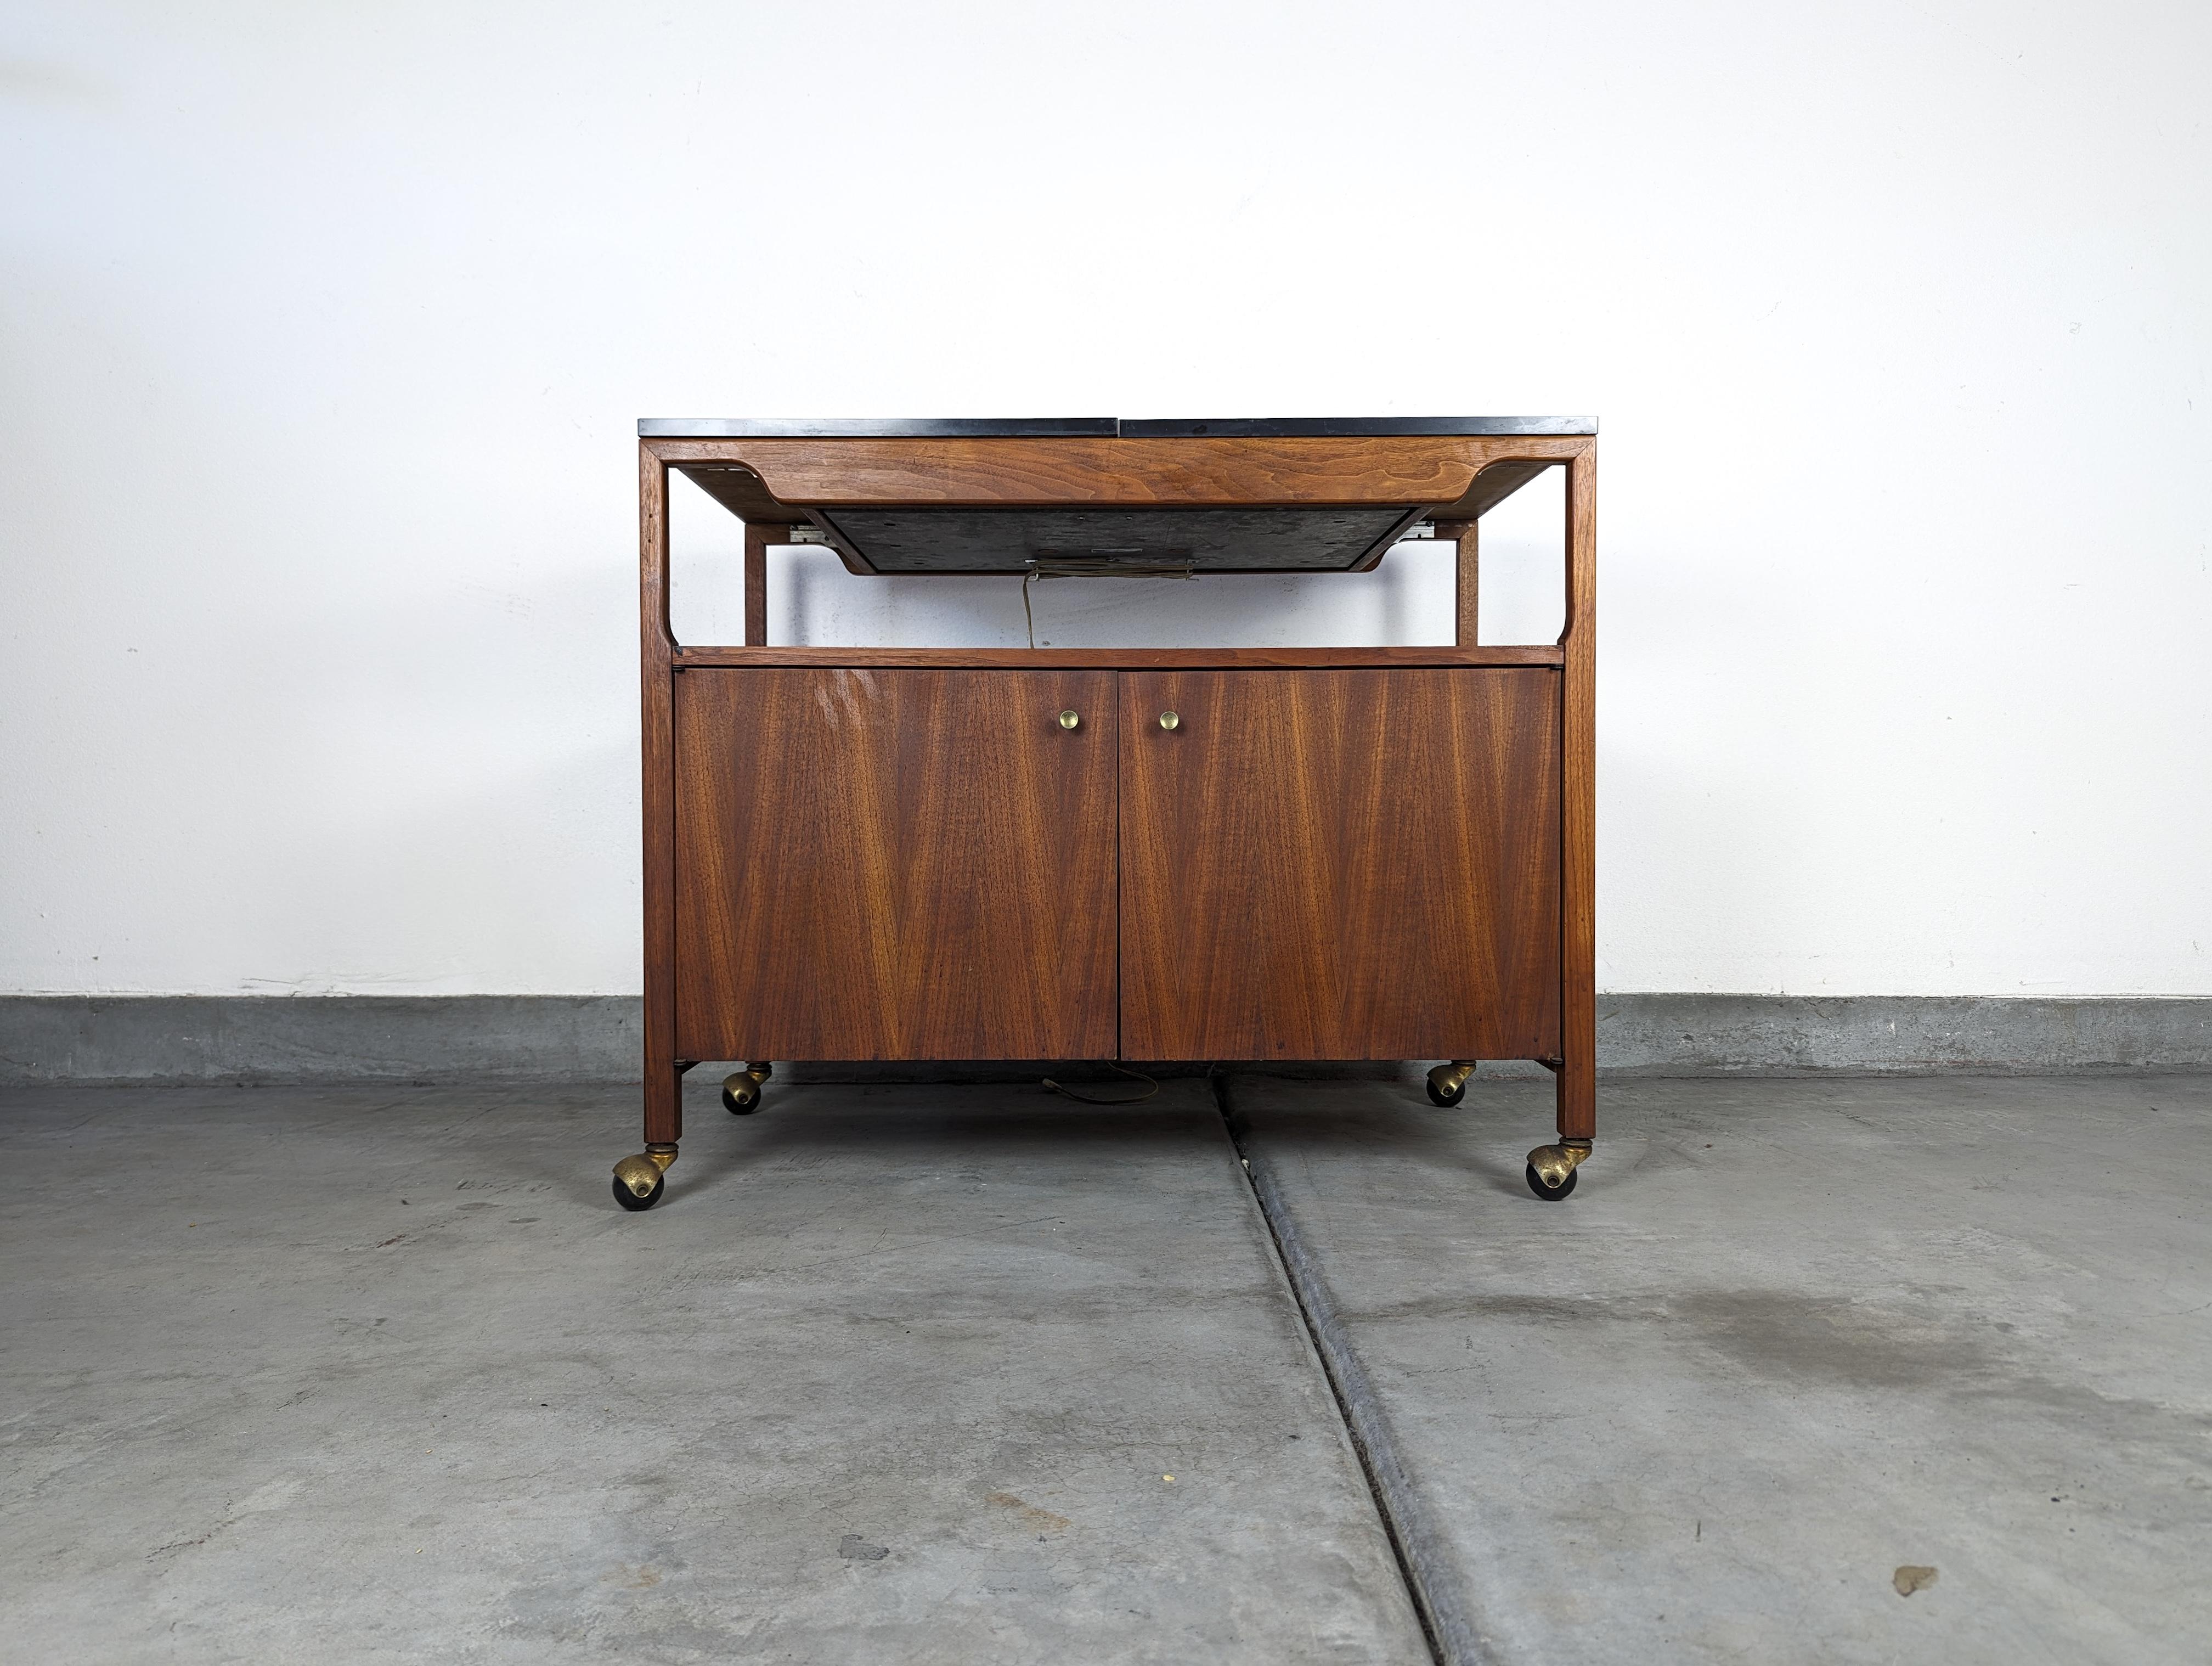 We are delighted to offer for sale this stunning, authentic mid-century modern serving cart, designed by the esteemed John Keal for Brown Saltman in the 1960s. A perfect blend of function and style, this piece is a must-have for lovers of vintage